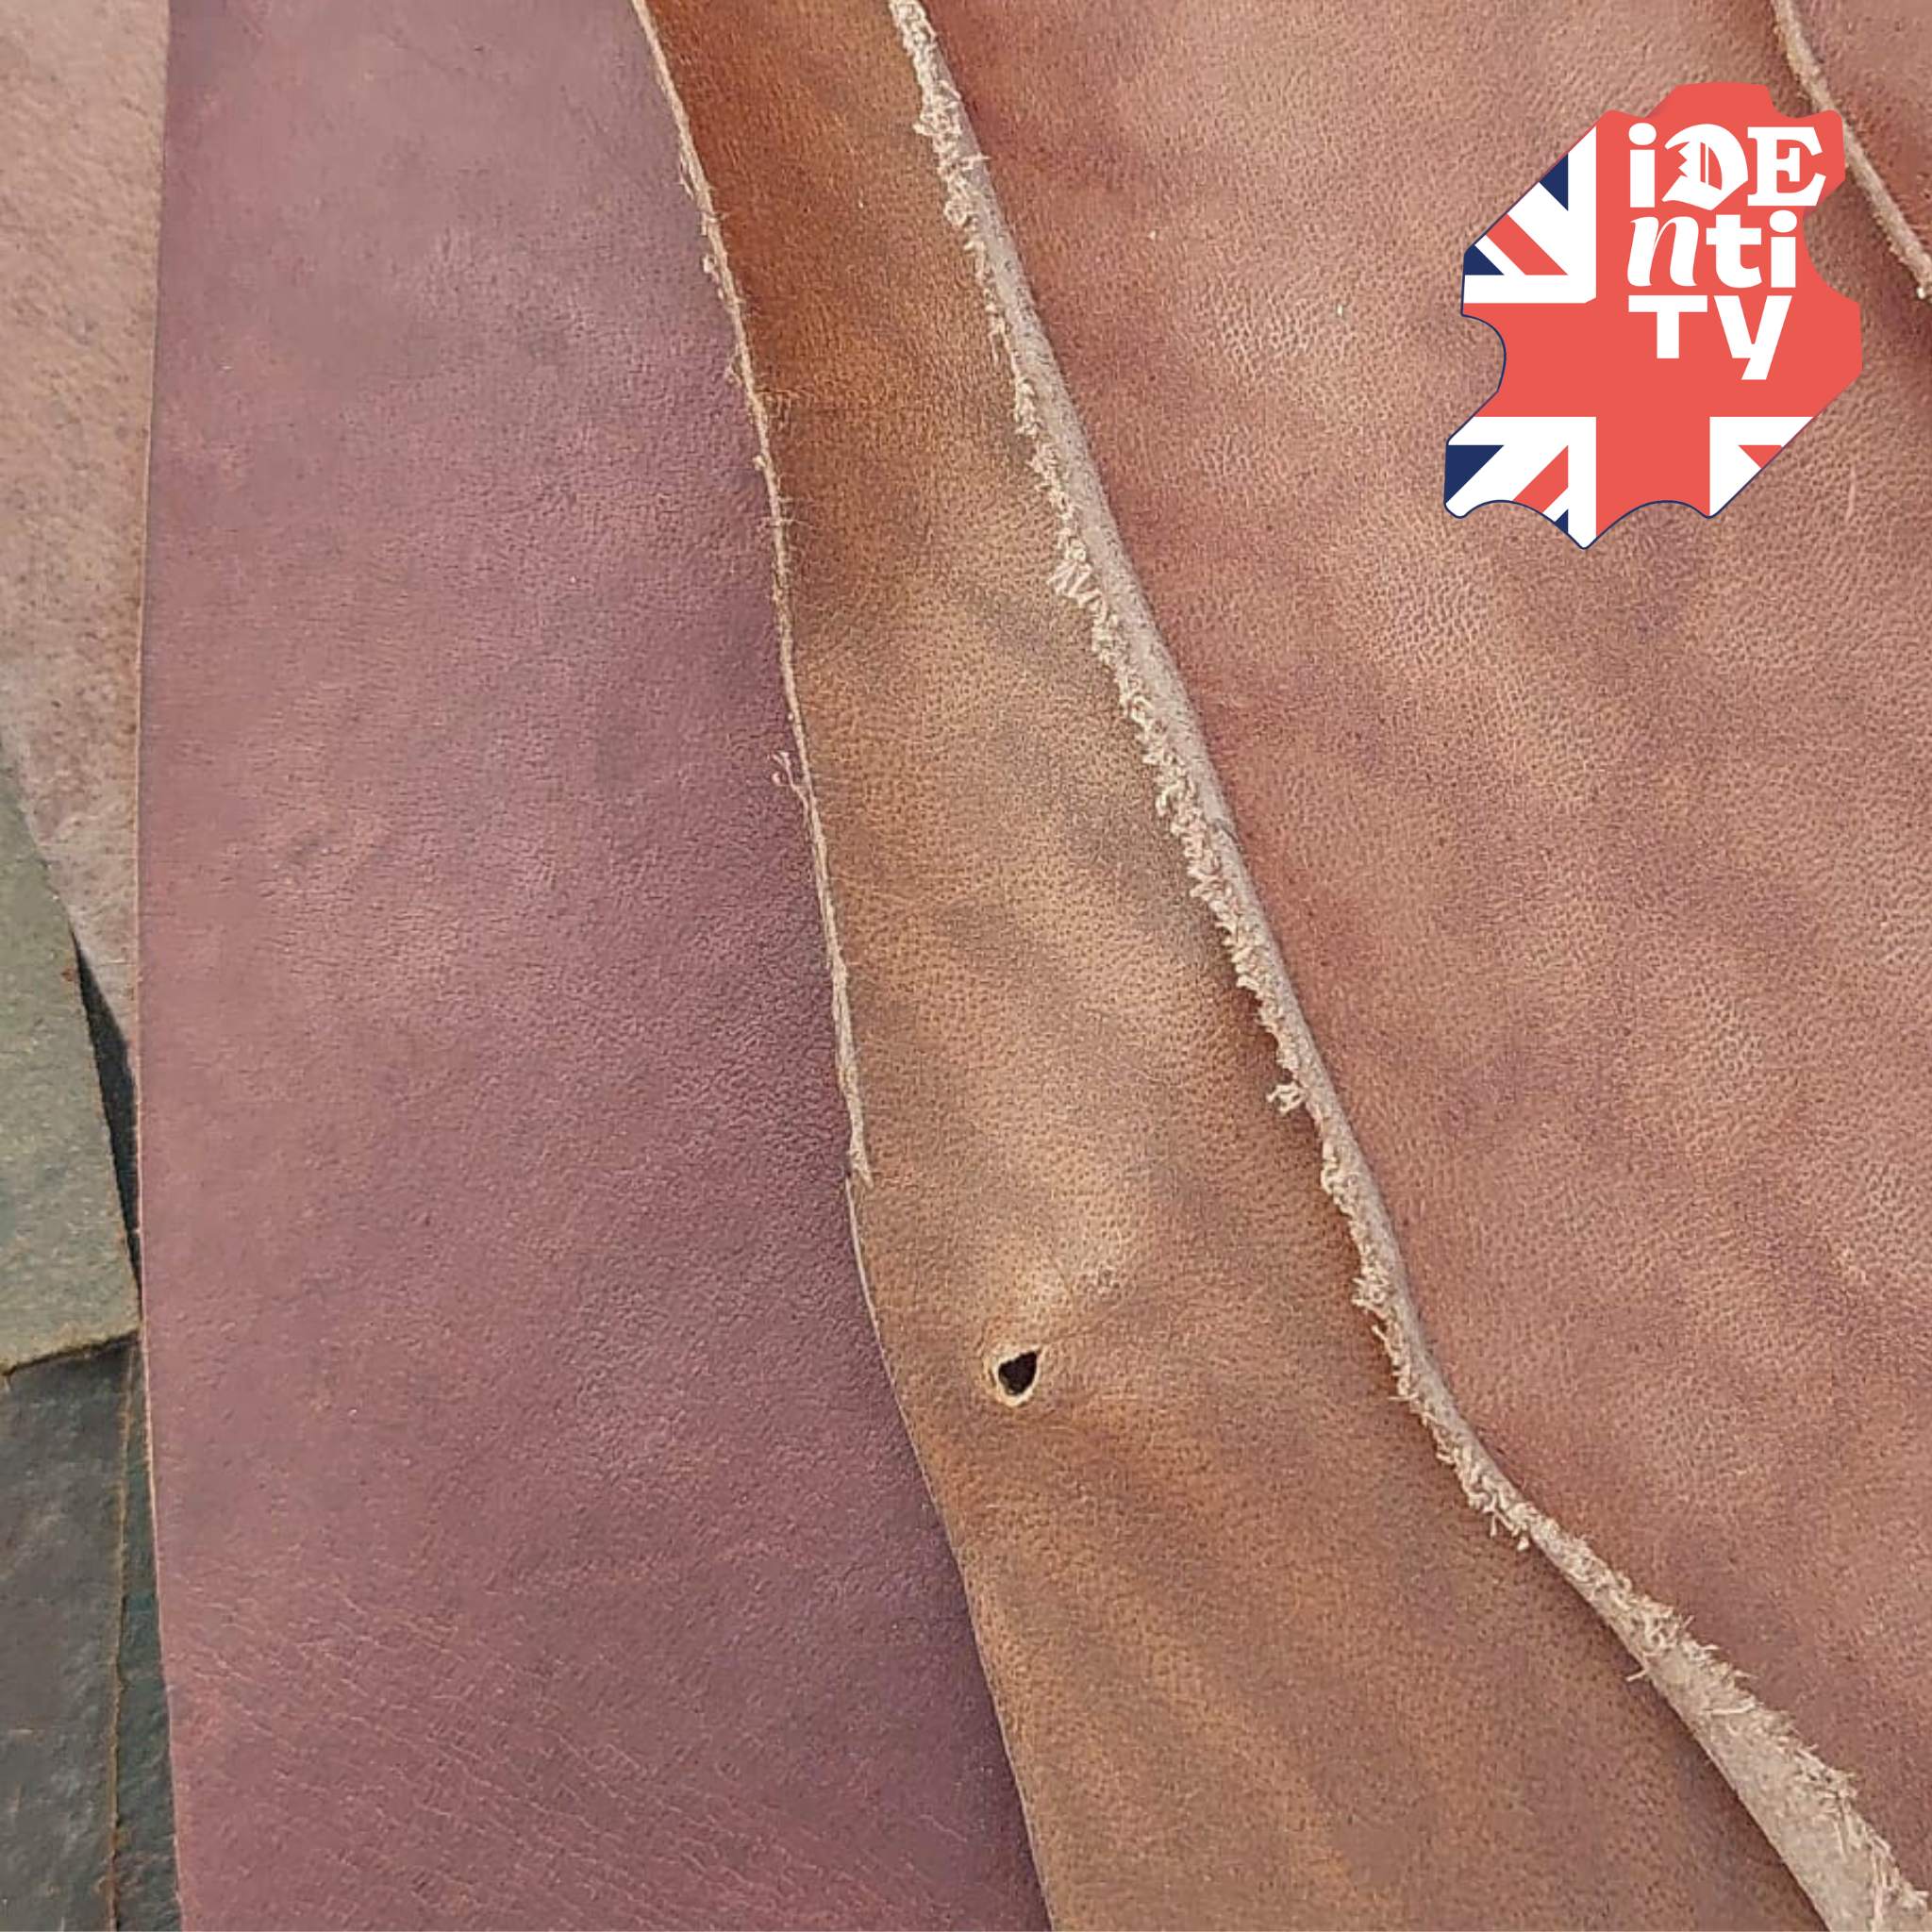 Leather coloured by traditional simple dye methods, with a mellow look and feel suitable for most leathercraft projects.